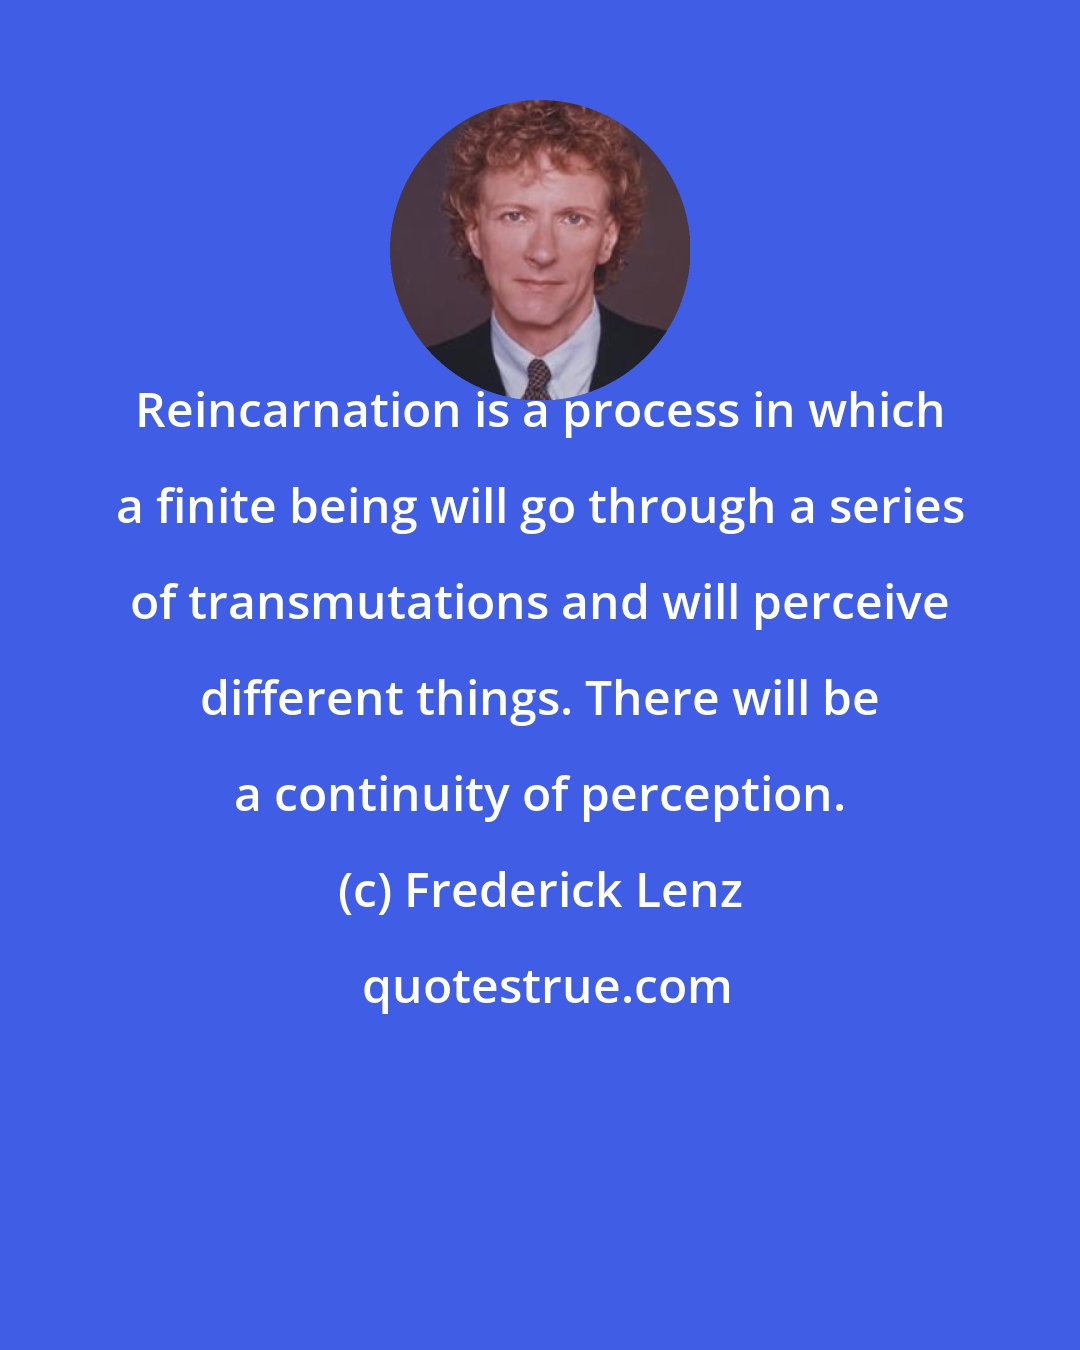 Frederick Lenz: Reincarnation is a process in which a finite being will go through a series of transmutations and will perceive different things. There will be a continuity of perception.